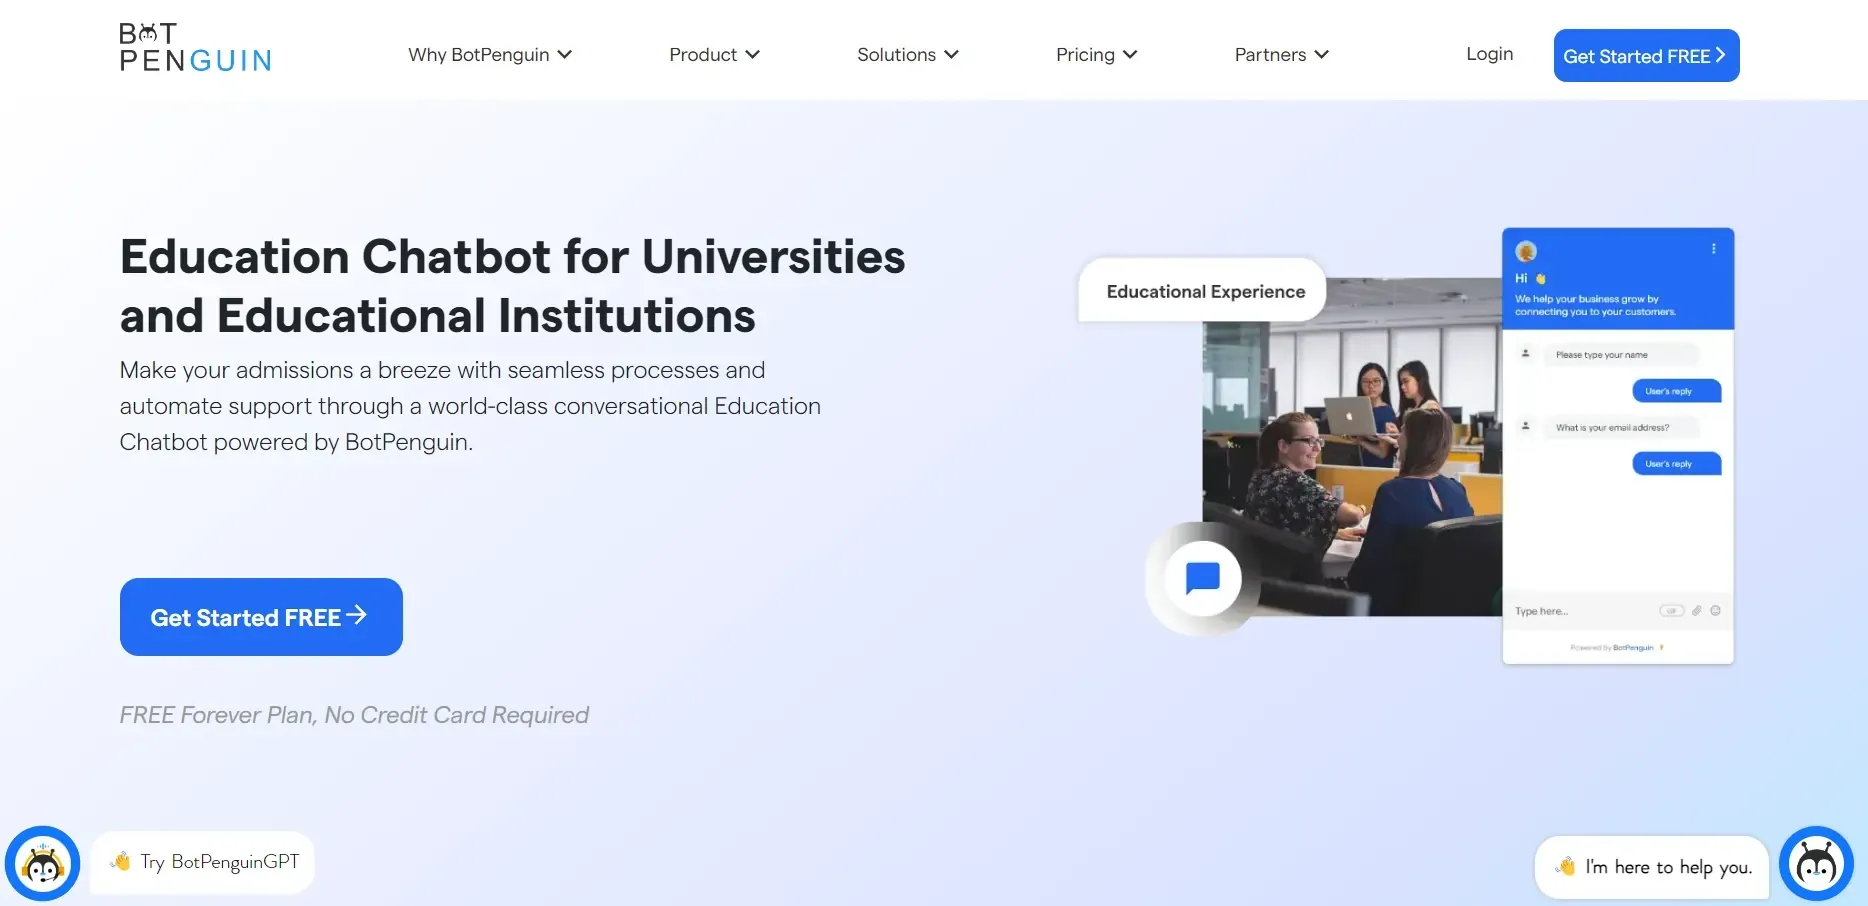 Education Chatbot for Universities